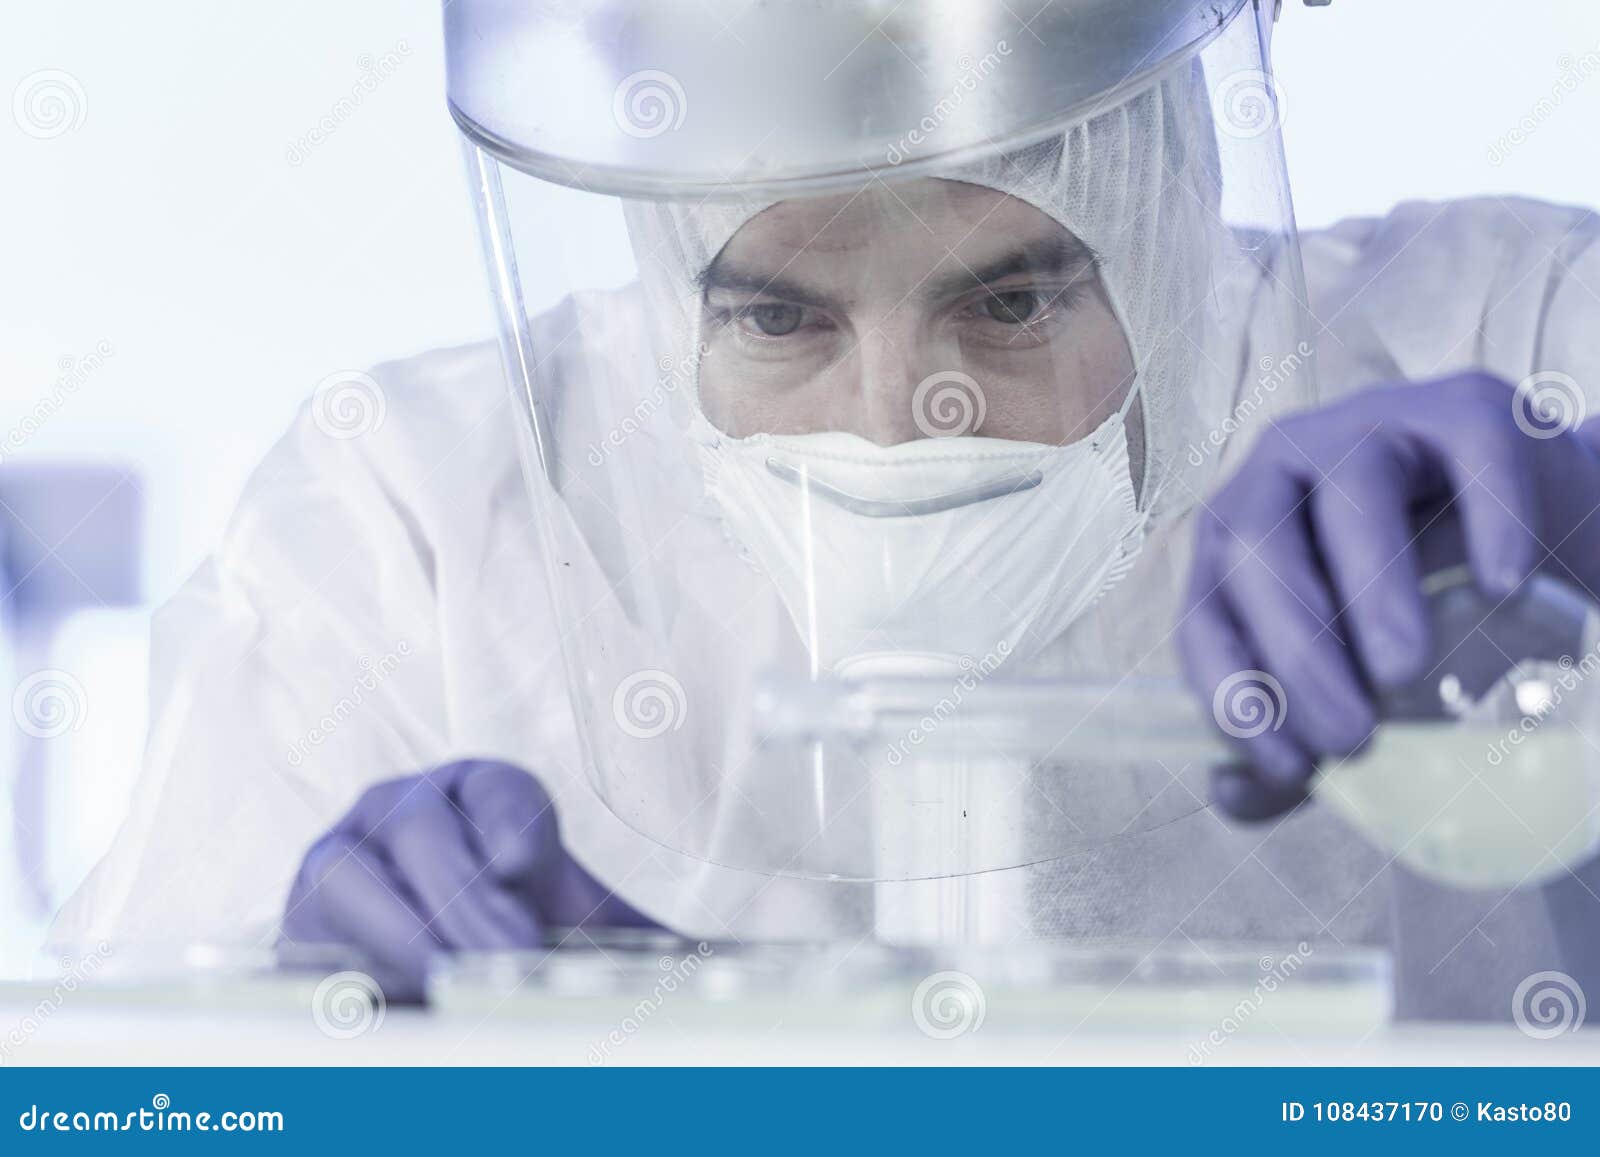 life scientist researching in bio hazard laboratory. high degree of protection work.